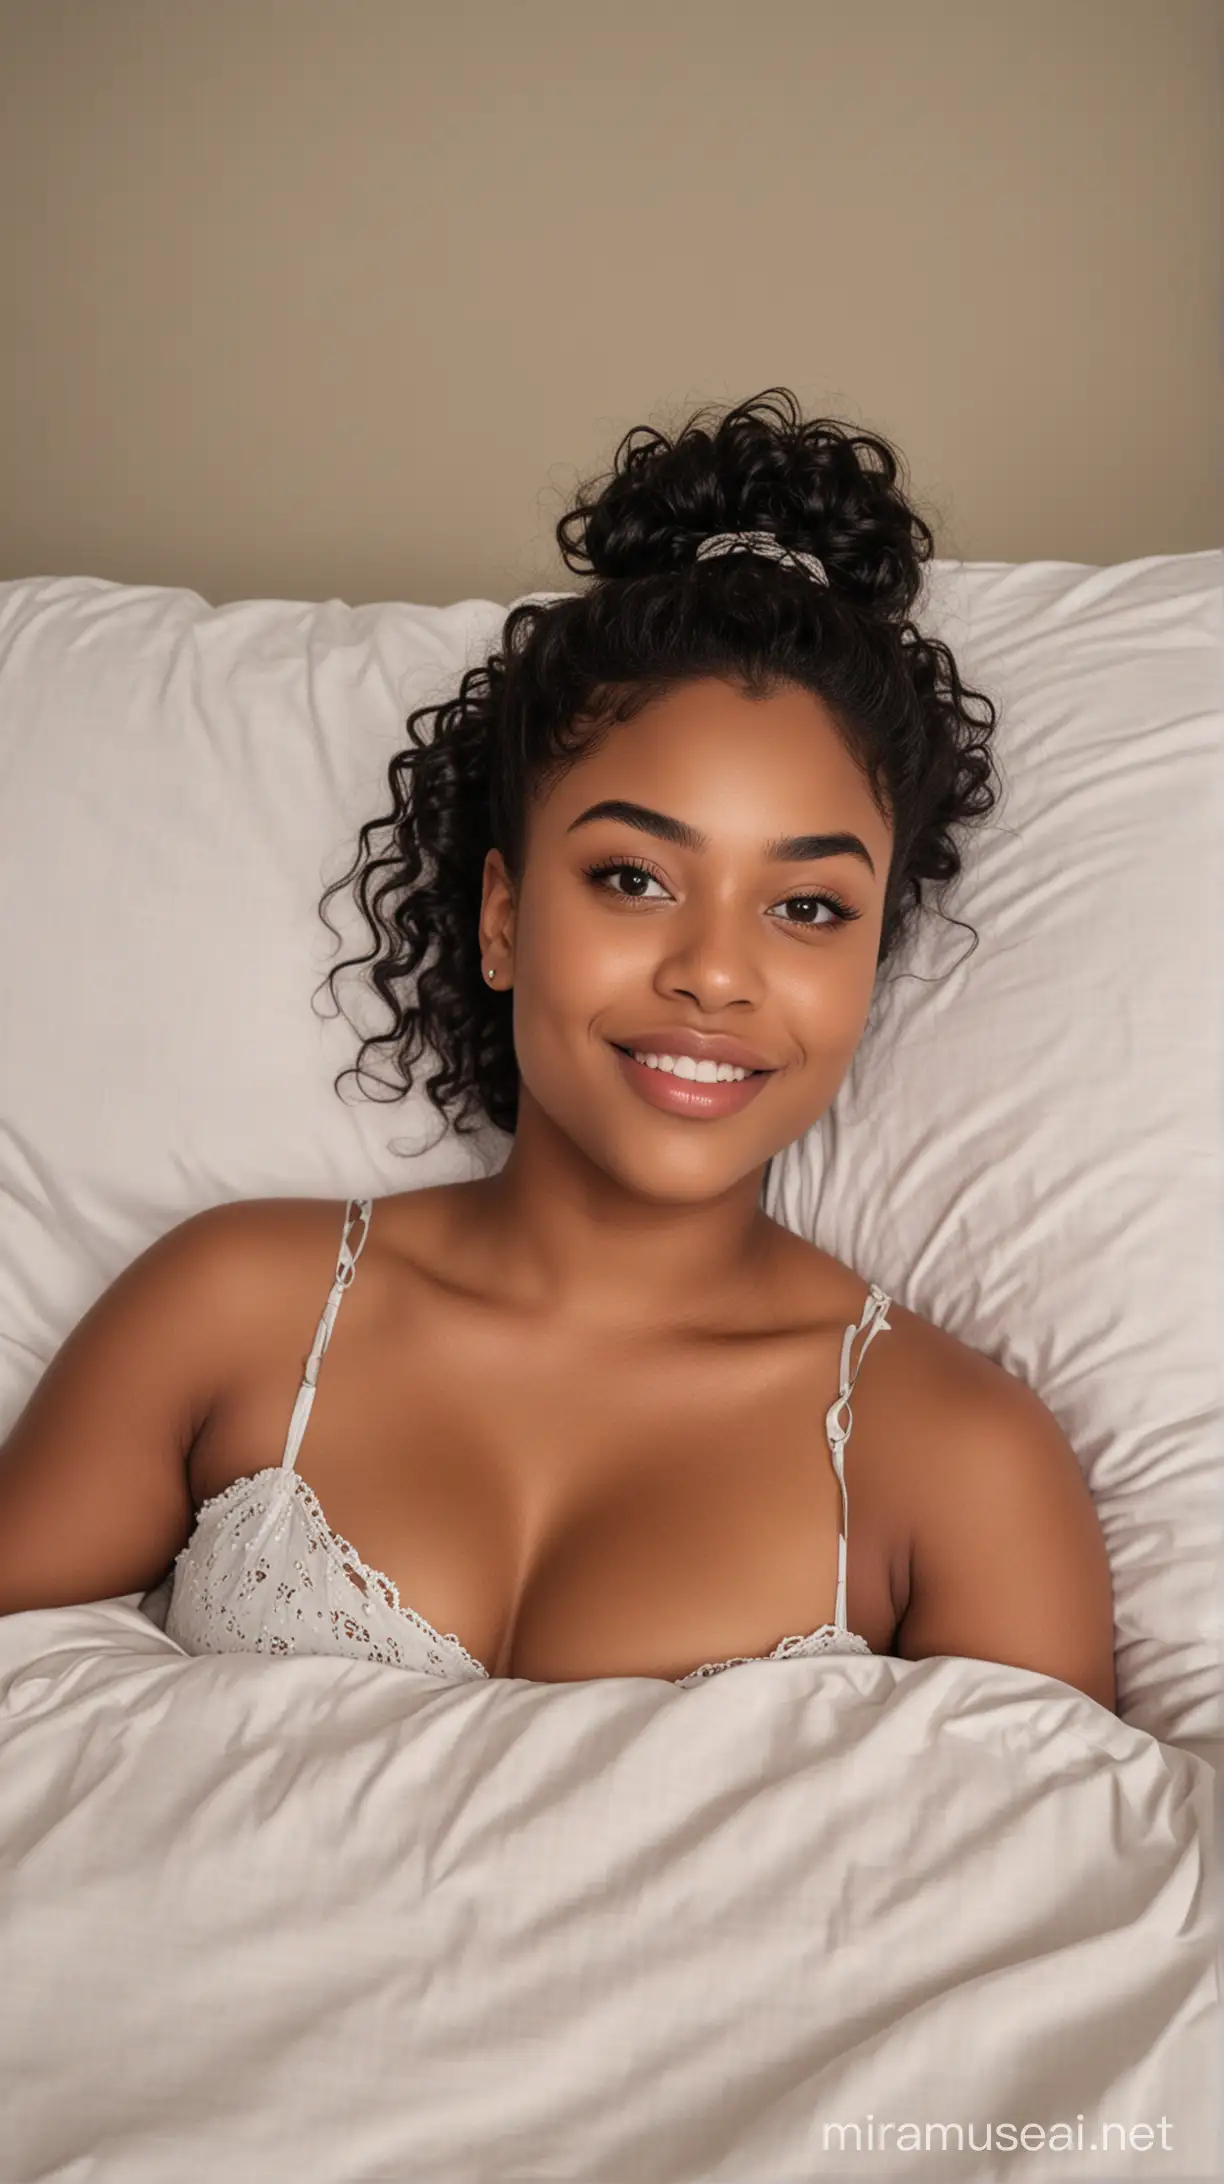 A 17 year old fat black woman with small eyes, wide lips, weak chin, small nose and long curly black hair with a bun at back wearing a short threaded night dress and lying on the bed sideways and smiling